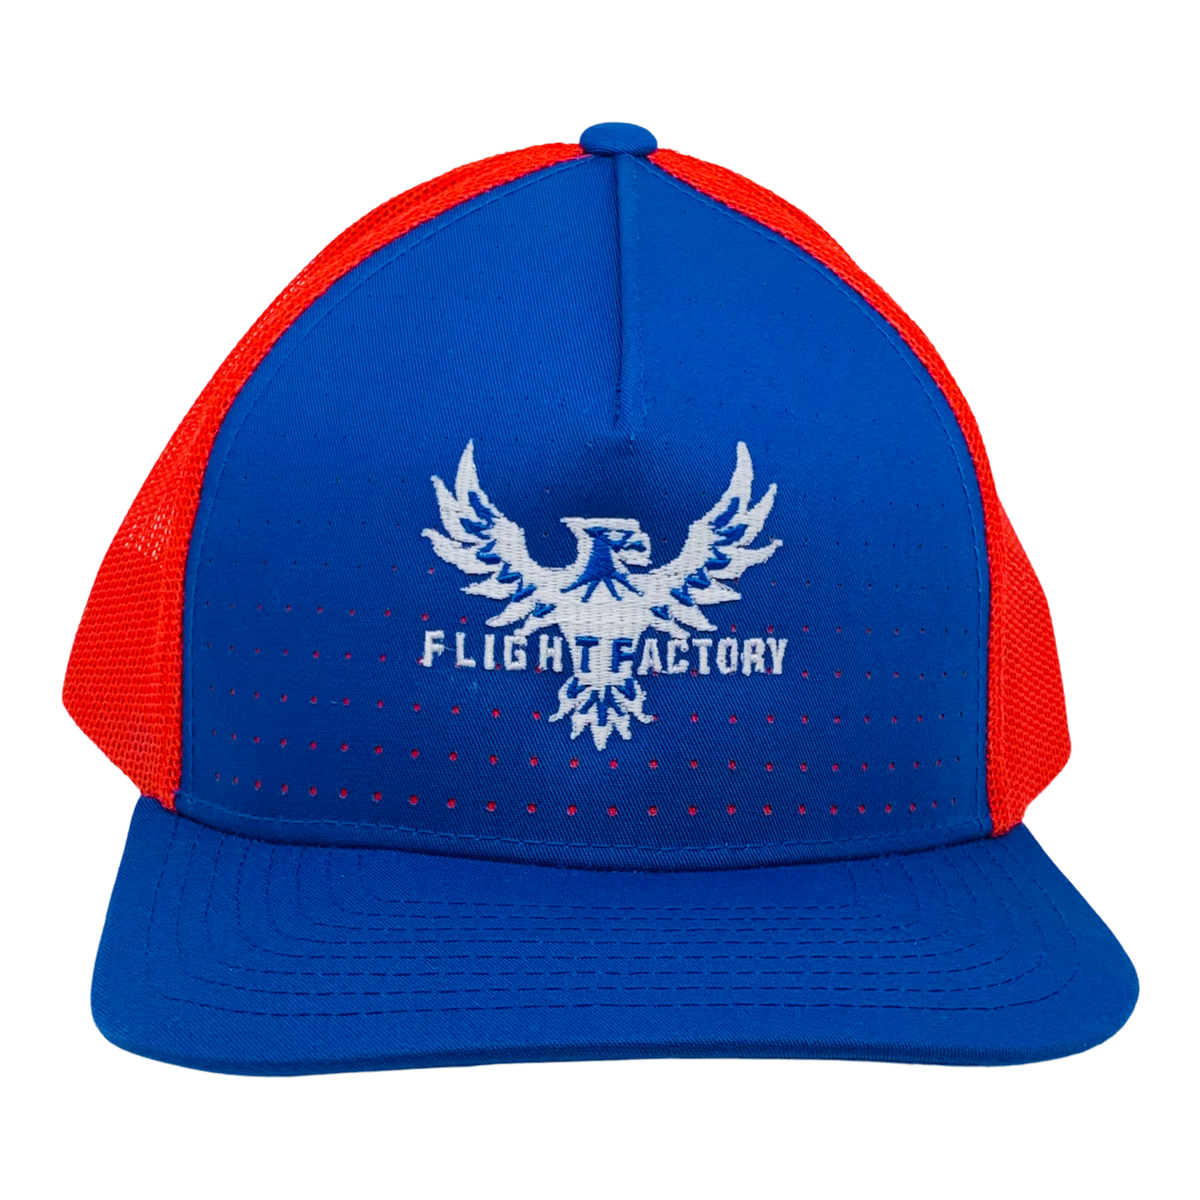 Flight Factory Eagle 5 Panel Perforated Trucker Hats